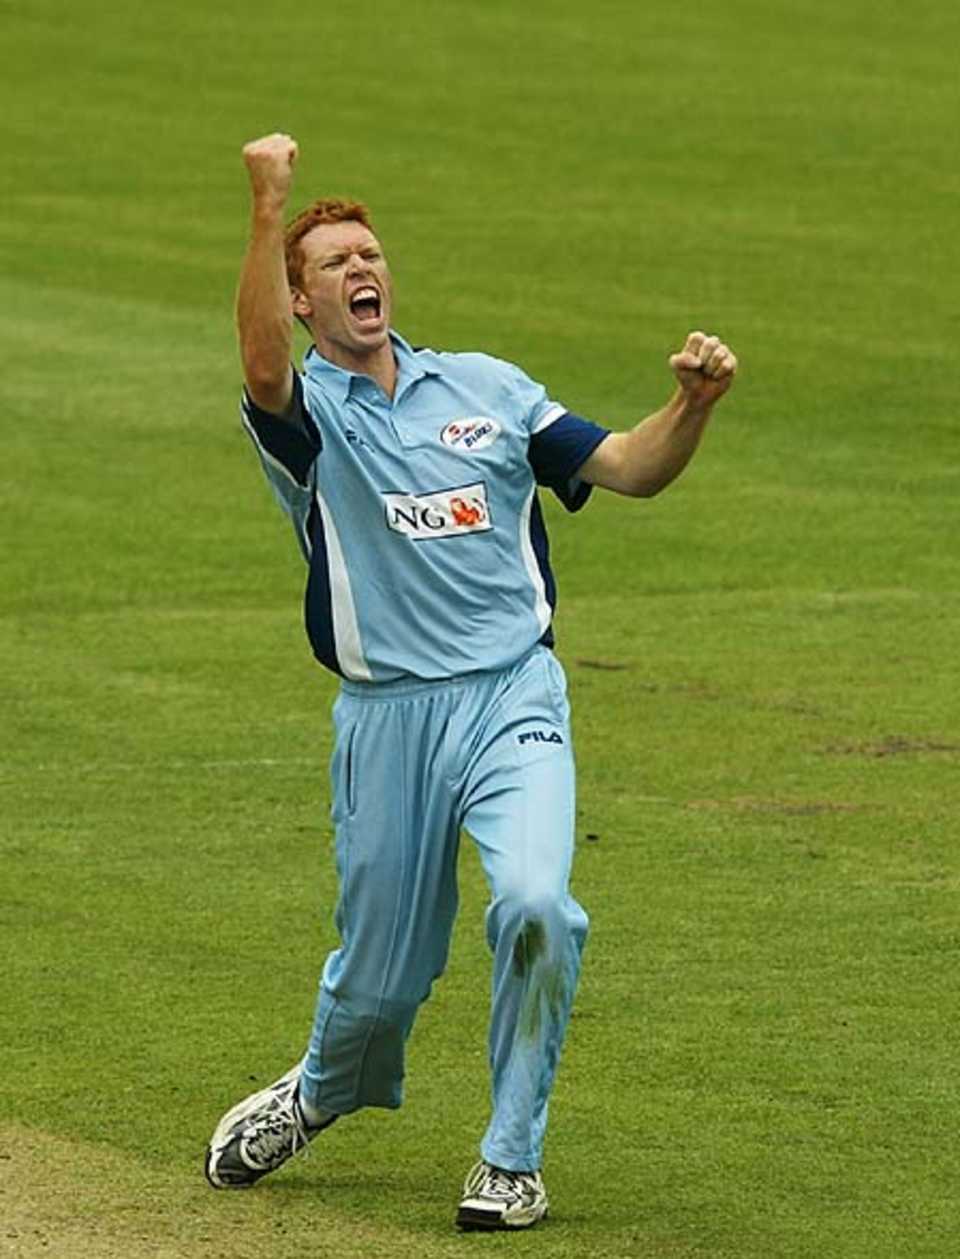 SYDNEY - DECEMBER 1: Dominic Thornely of the Blues celebrates the wicket of Brad Hodge during the ING Cup match between the New South Wales Blues and Victorian Bushrangers at the Sydney Cricket Ground in Sydney, Australia on December 1, 2002